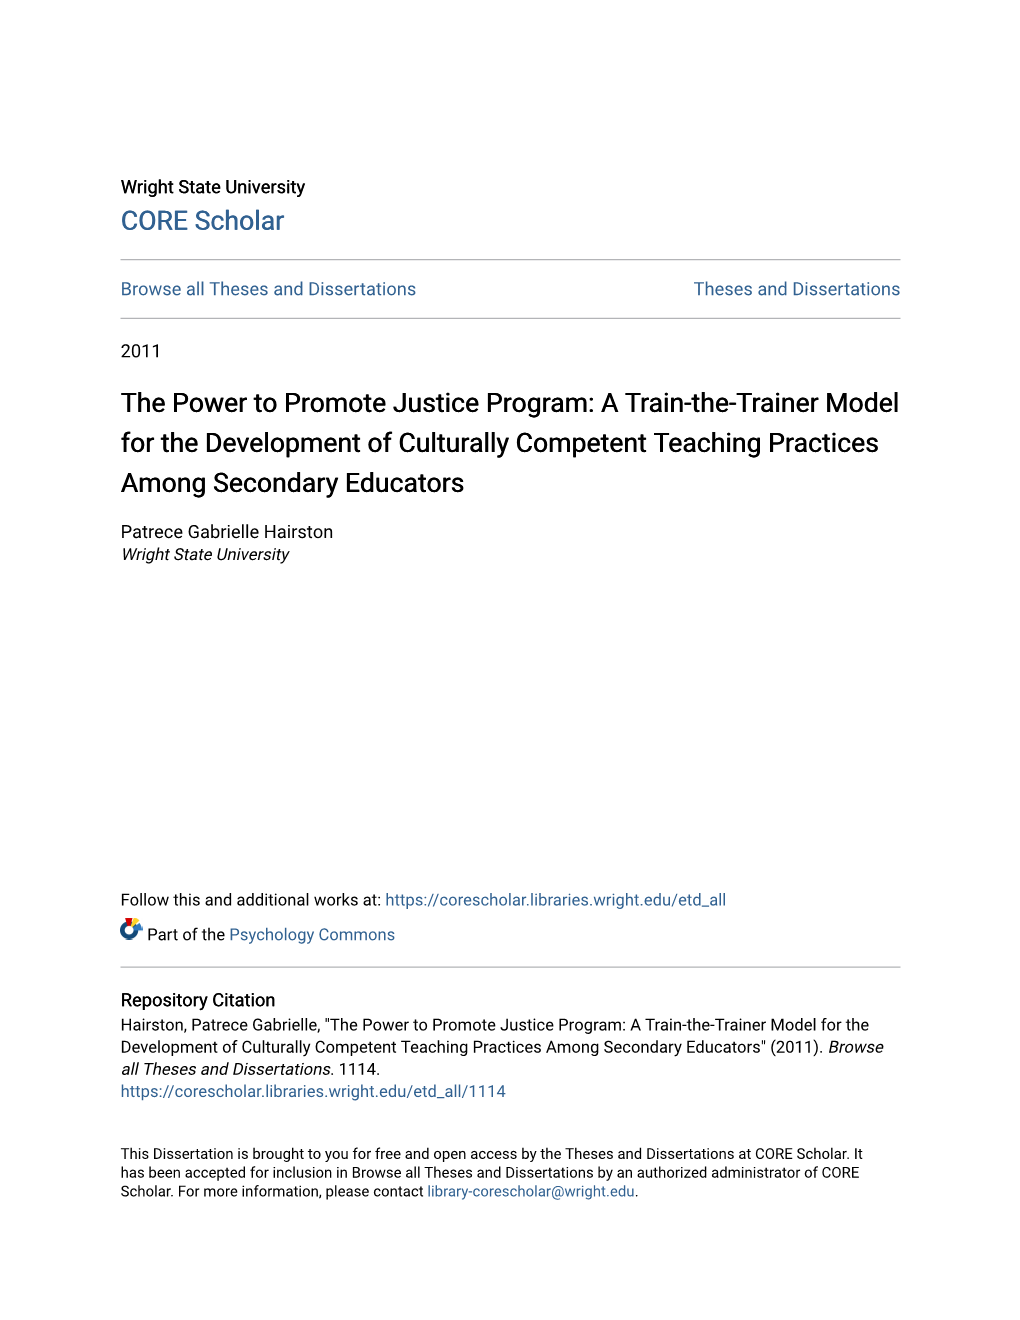 The Power to Promote Justice Program: a Train-The-Trainer Model for the Development of Culturally Competent Teaching Practices Among Secondary Educators